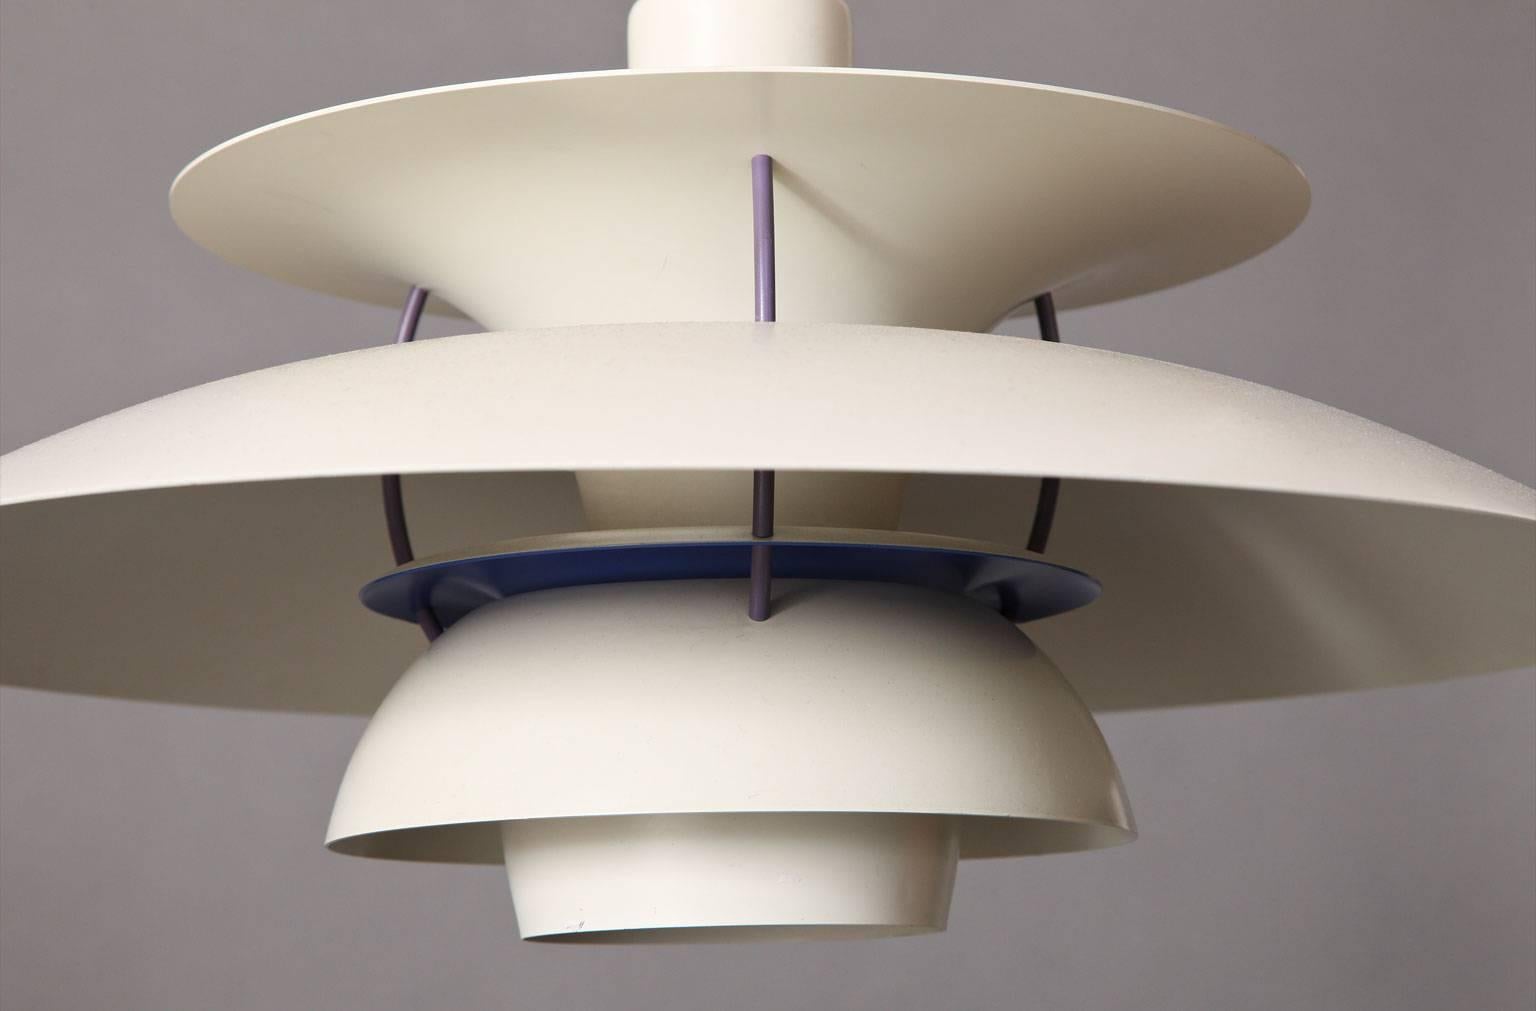 Poul Henningsen (1894-1967).
Pair of enameled aluminium hanging lights with off-white enameled finish and interior reflector shade in violet. Suspended from cloth wrapped cord and attached with red interior and vent disk,
Danish, circa